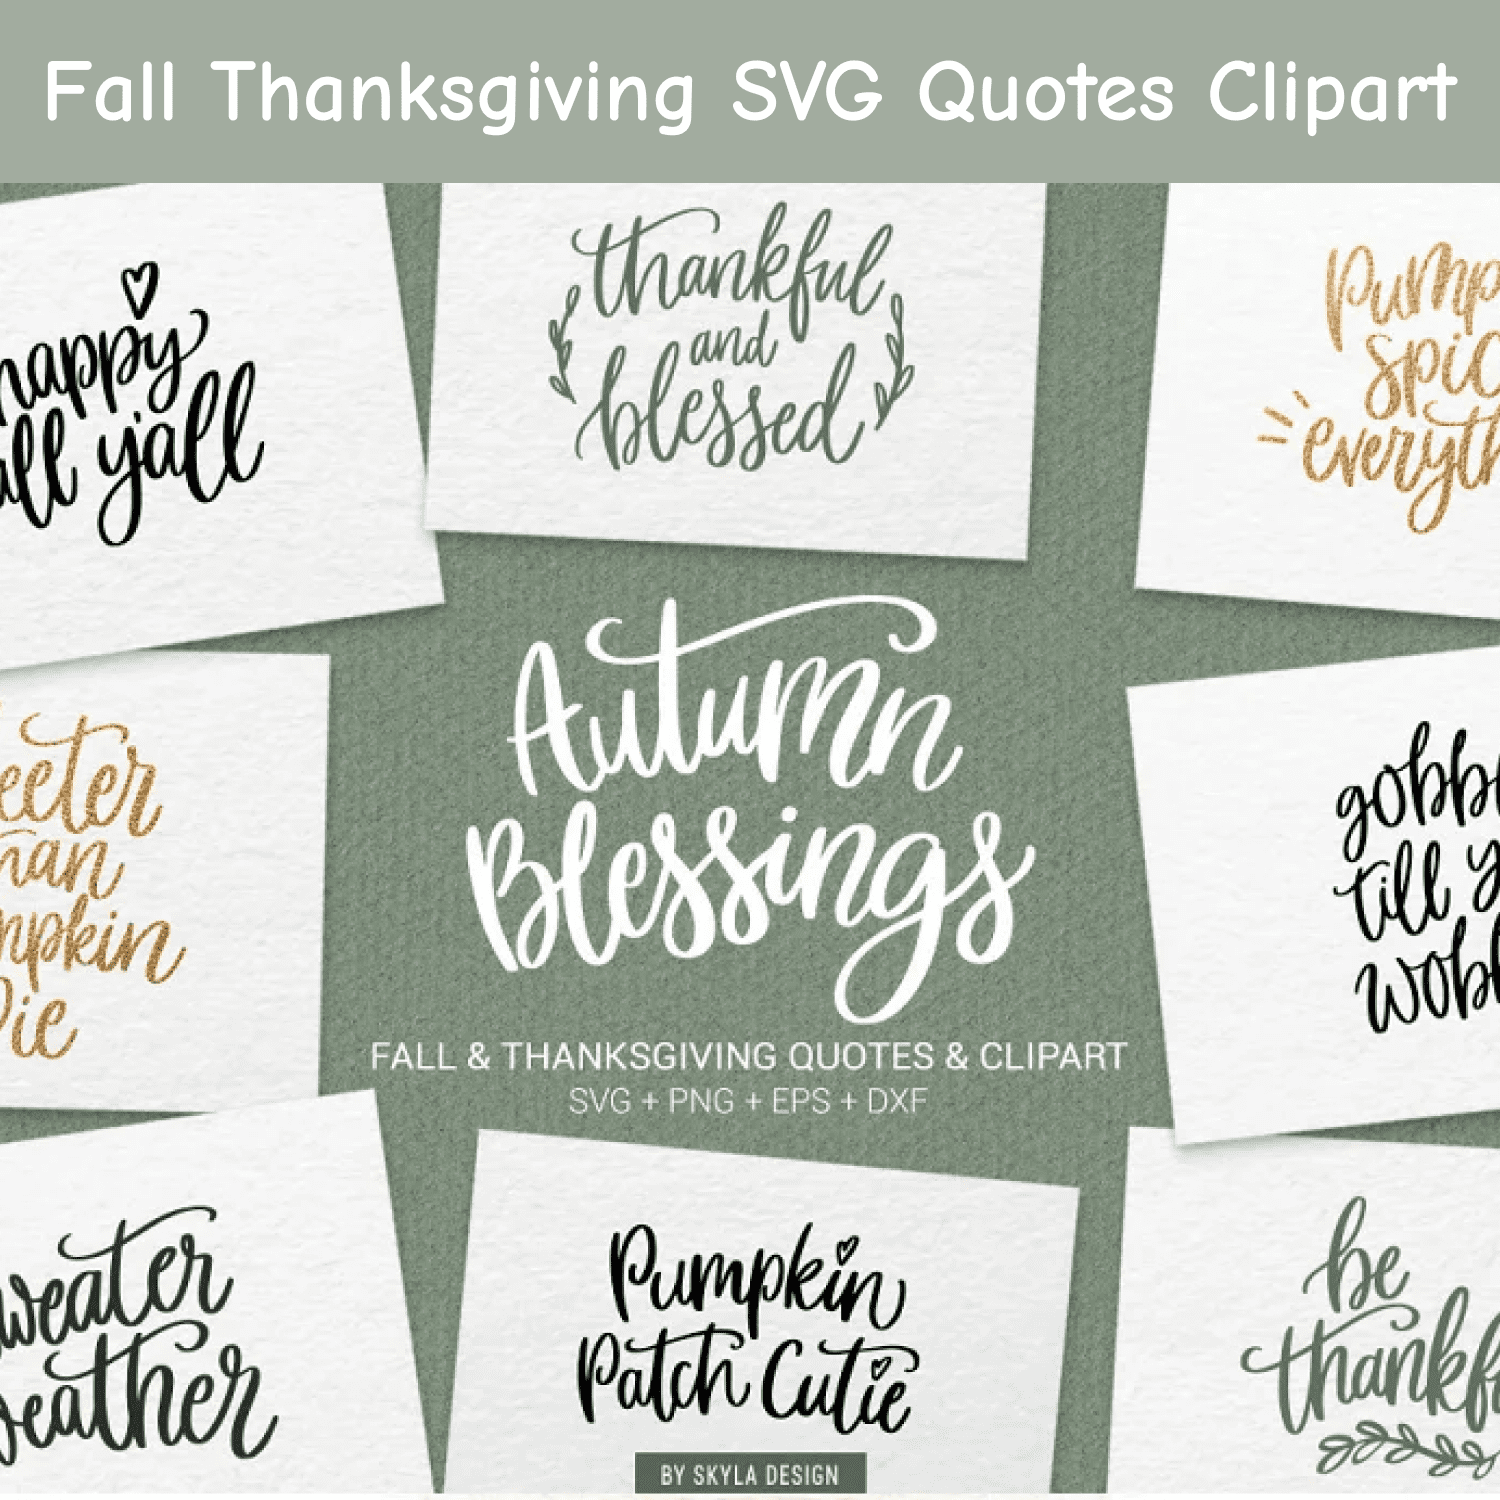 Fall Thanksgiving SVG Quotes Clipart cover.